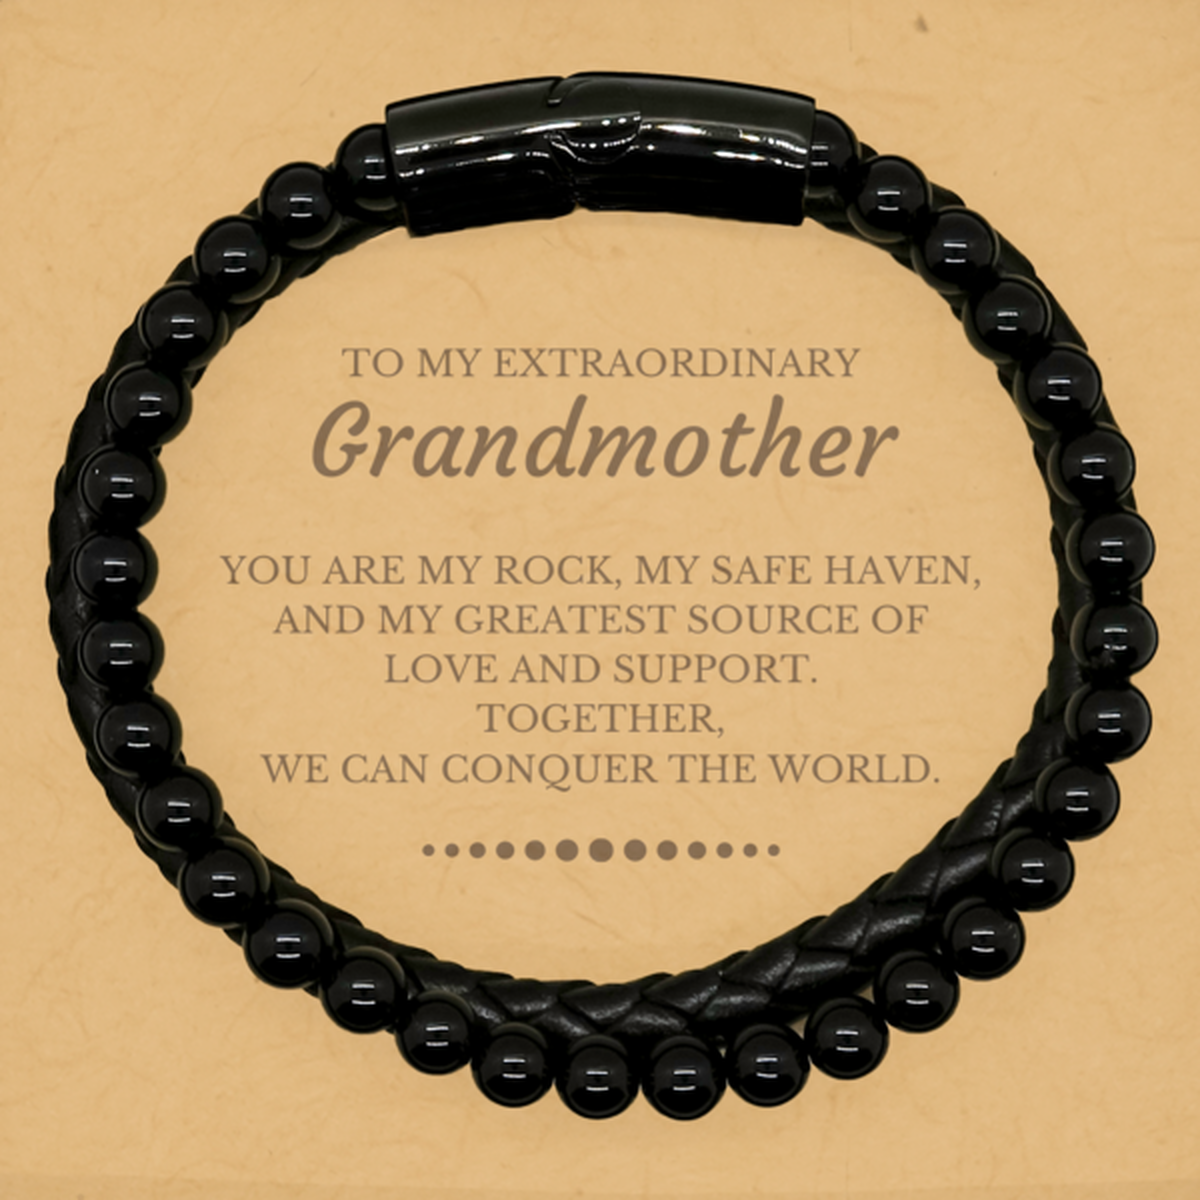 To My Extraordinary Grandmother Gifts, Together, we can conquer the world, Birthday Stone Leather Bracelets For Grandmother, Christmas Gifts For Grandmother